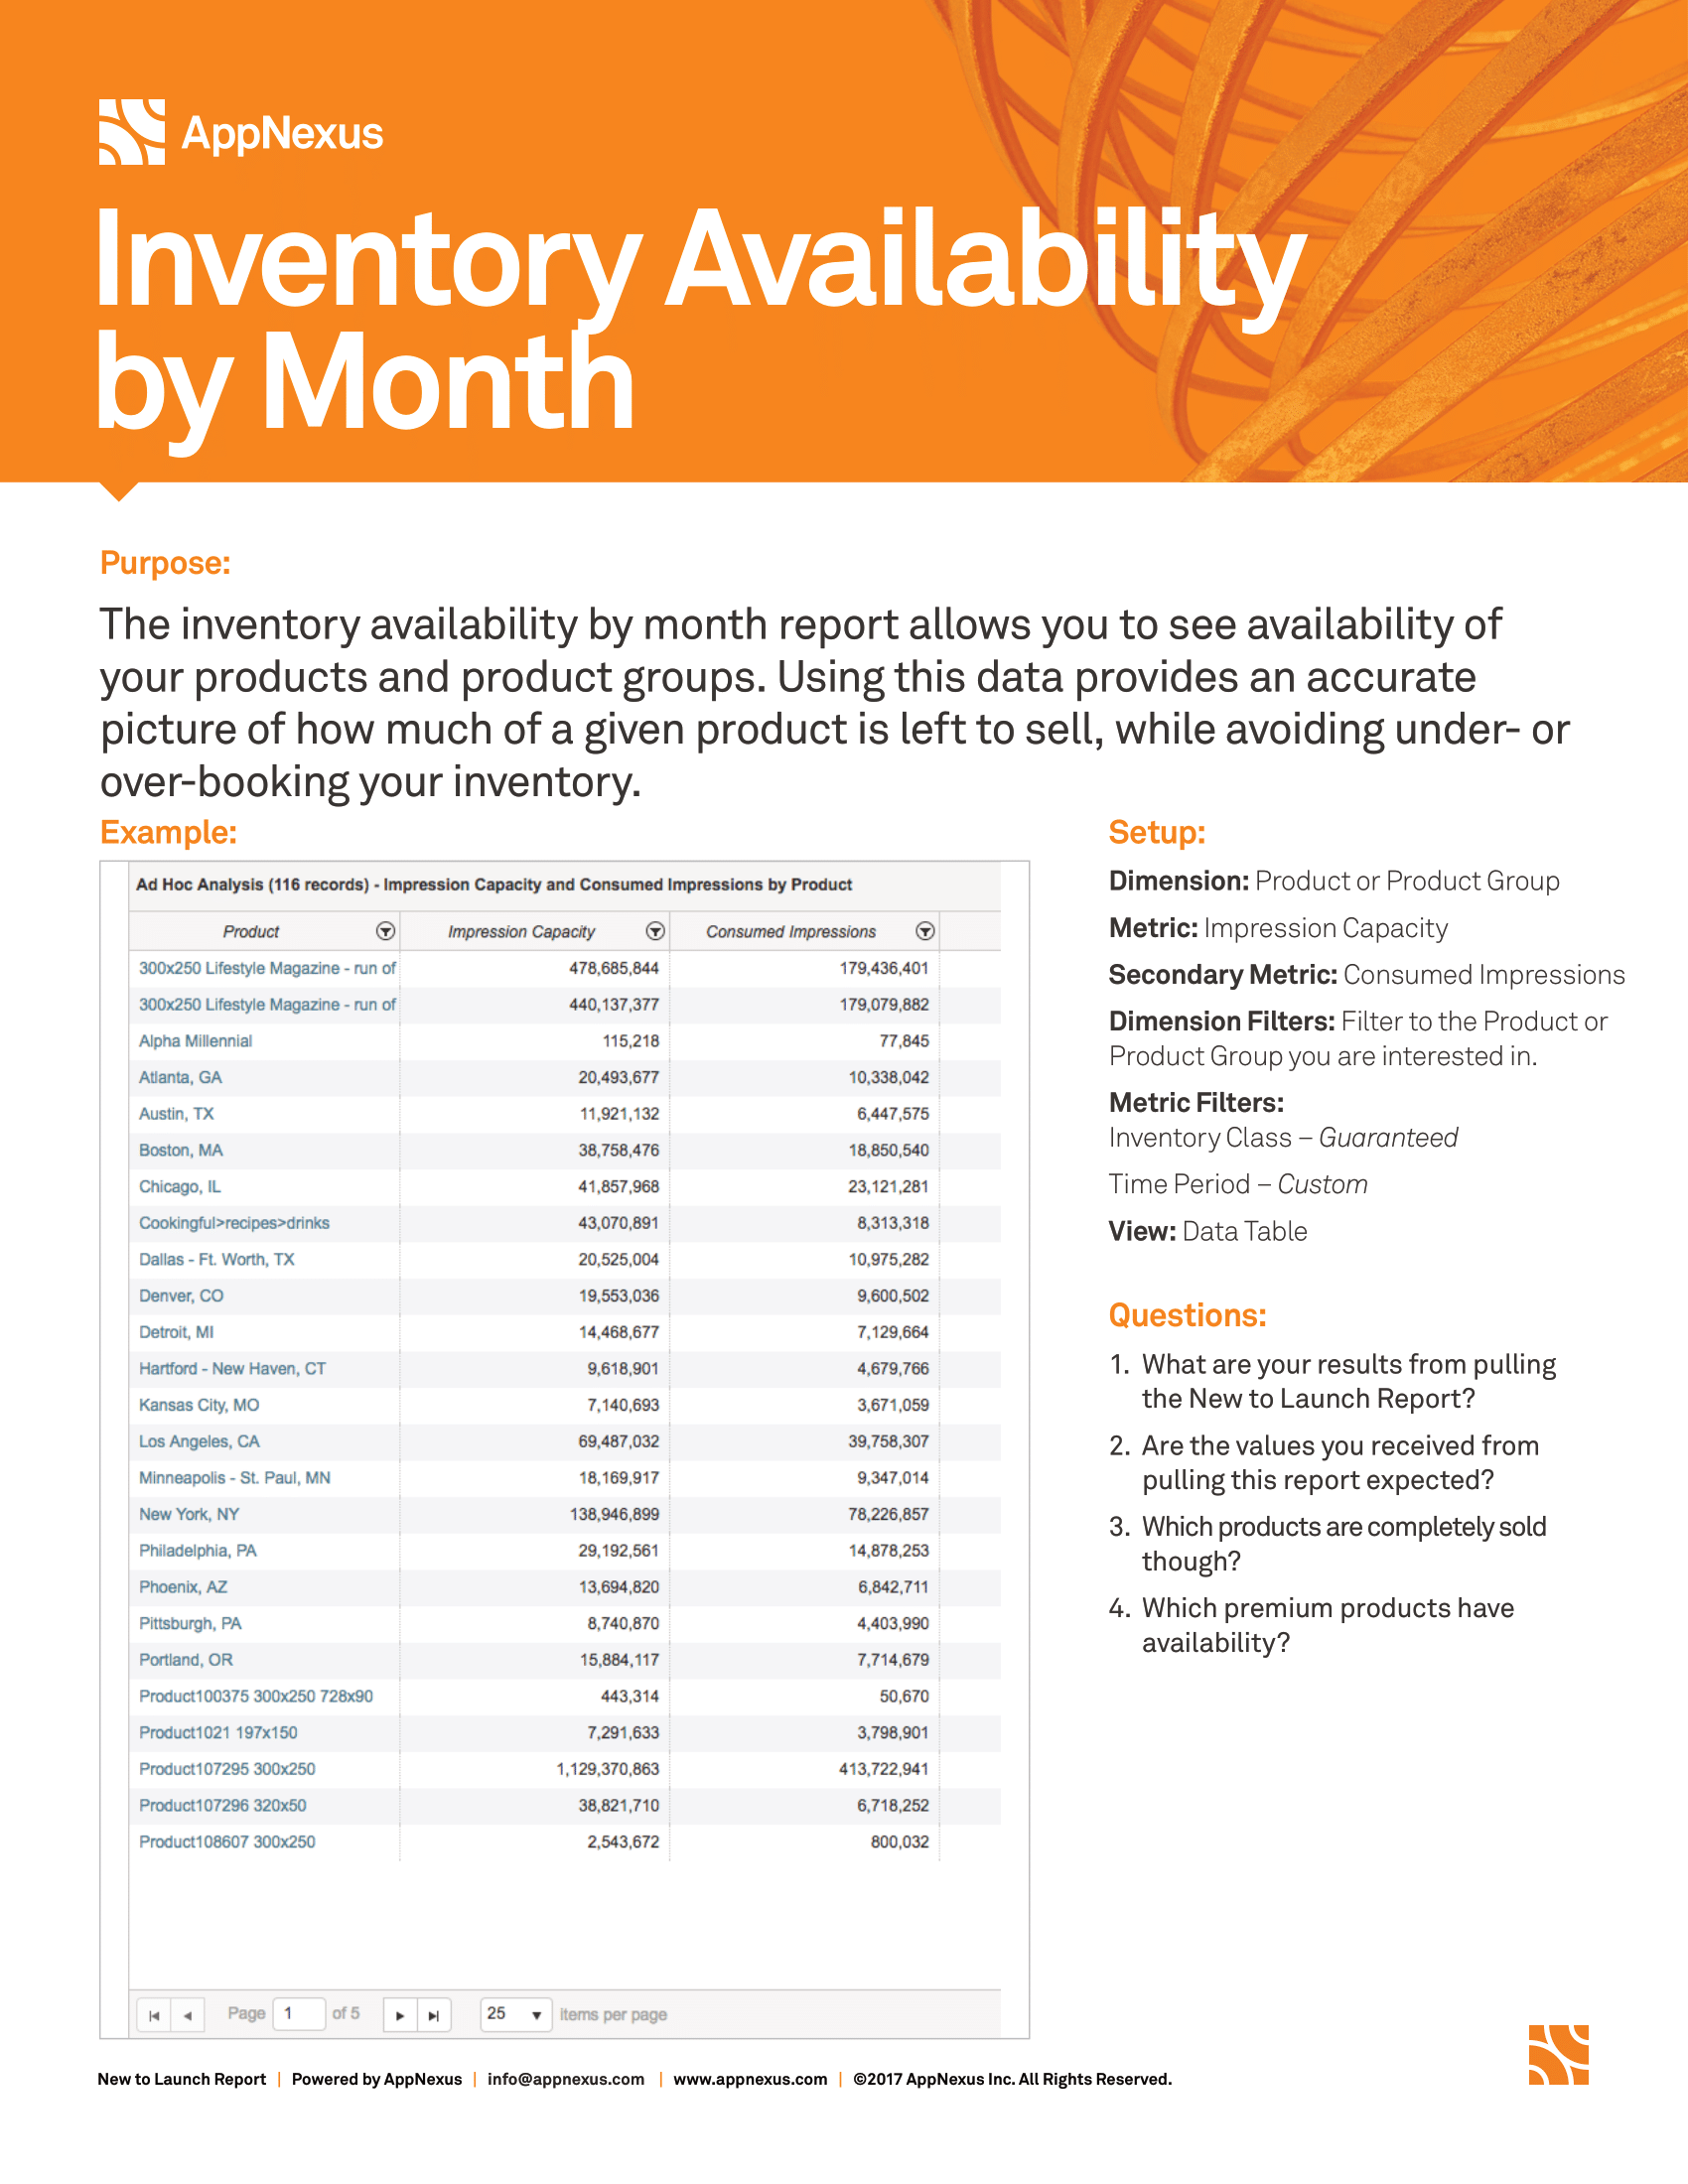 Screenshot that provides details about the Inventory Availability by Month report.